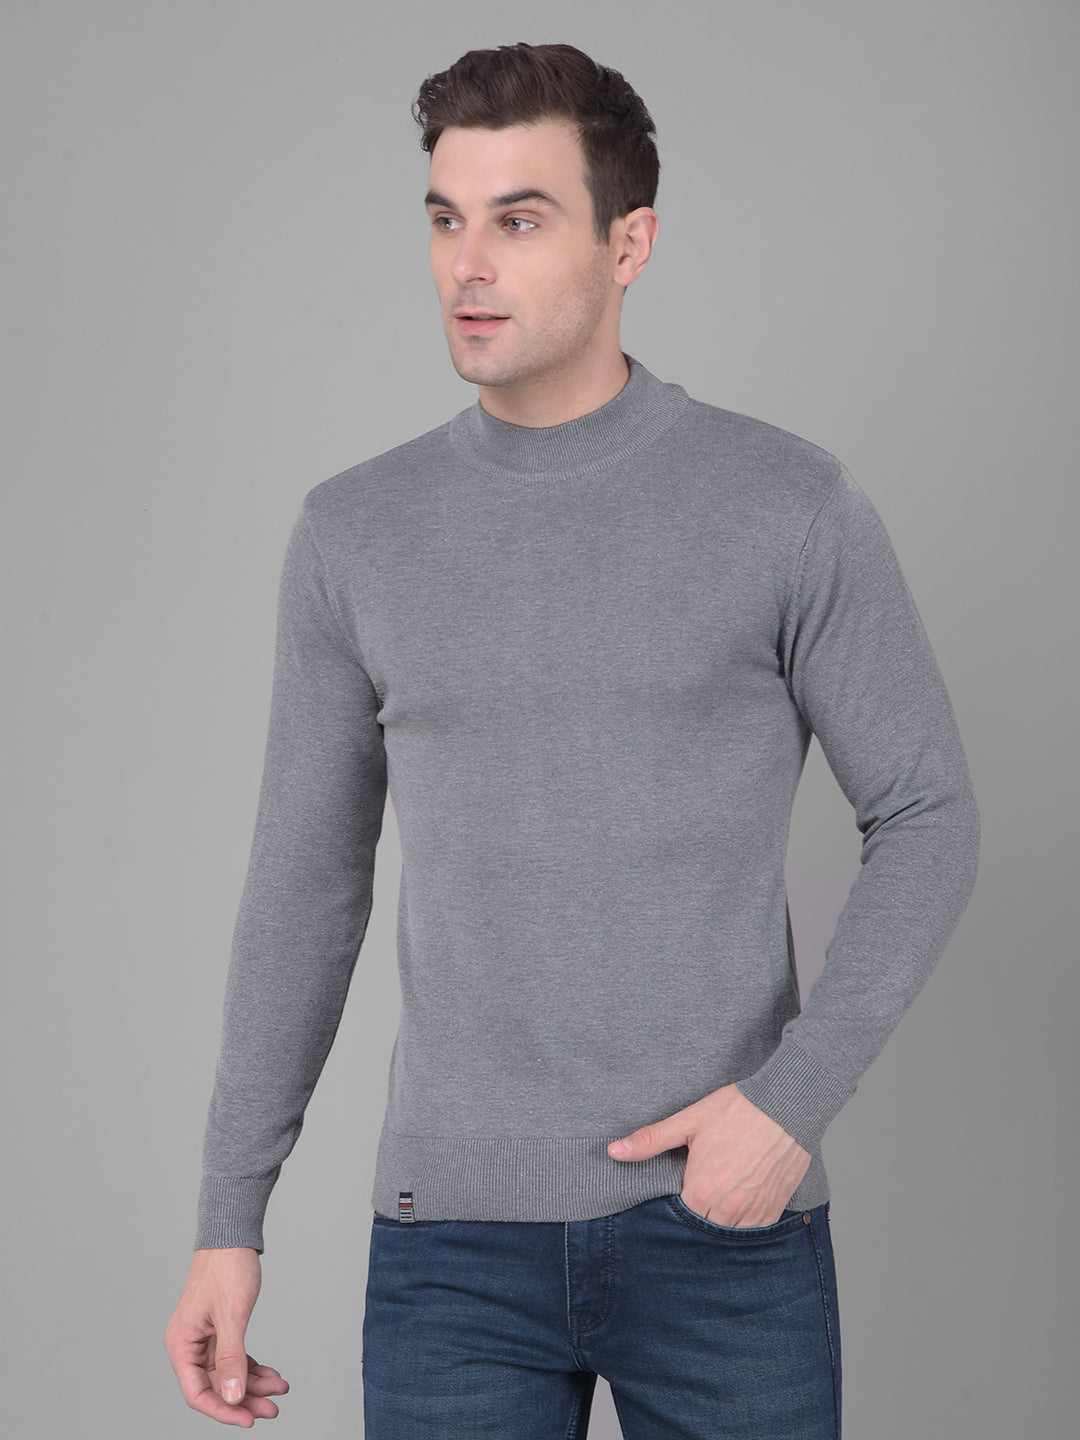 cobb solid grey high neck sweater